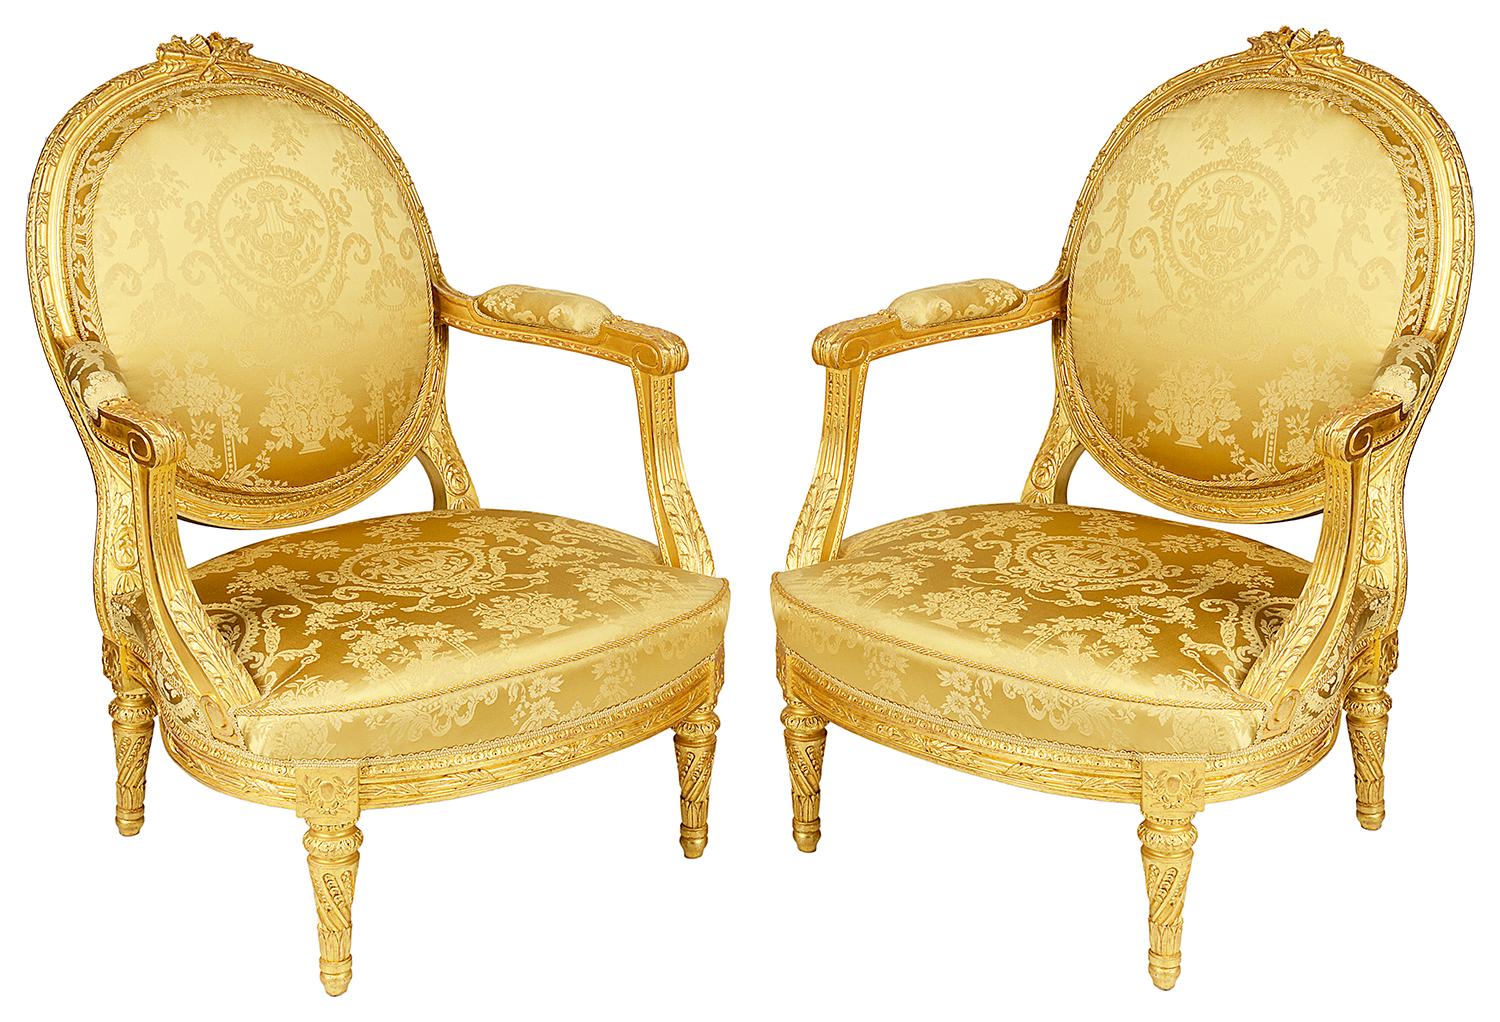 A very impressive good quality 19th century carved giltwood French Louis XVI style salon suite, consisting on a sofa and a pair of arm chairs. Each having moulded to the show wood frame, leaf ribbon decoration, classical silk damask fabric and